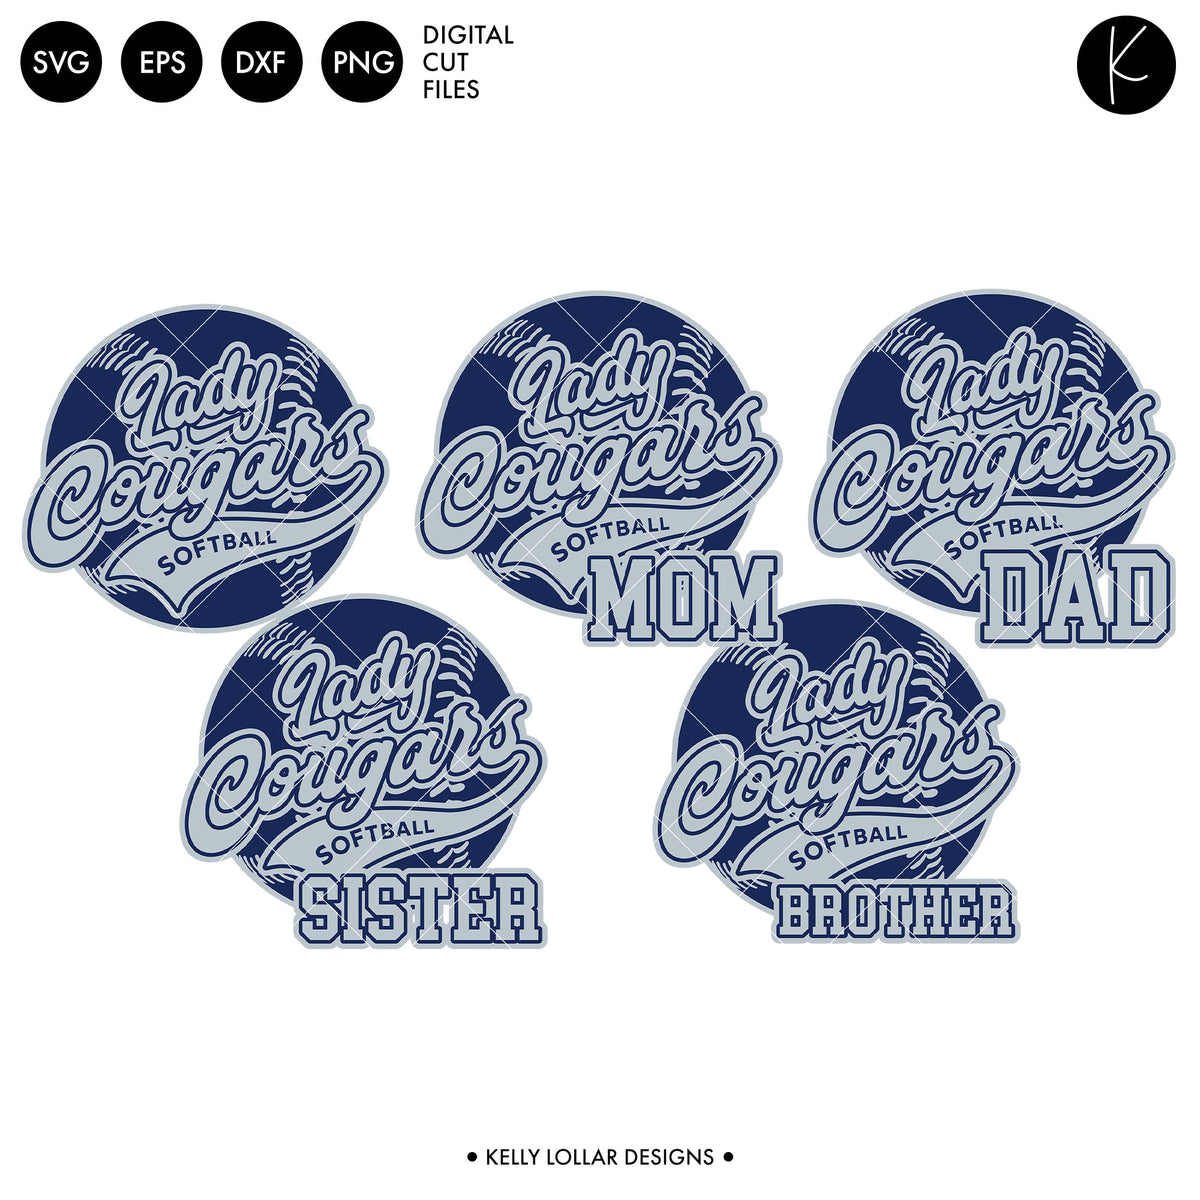 Lady Cougars Softball Bundle | SVG DXF EPS PNG Cut Files